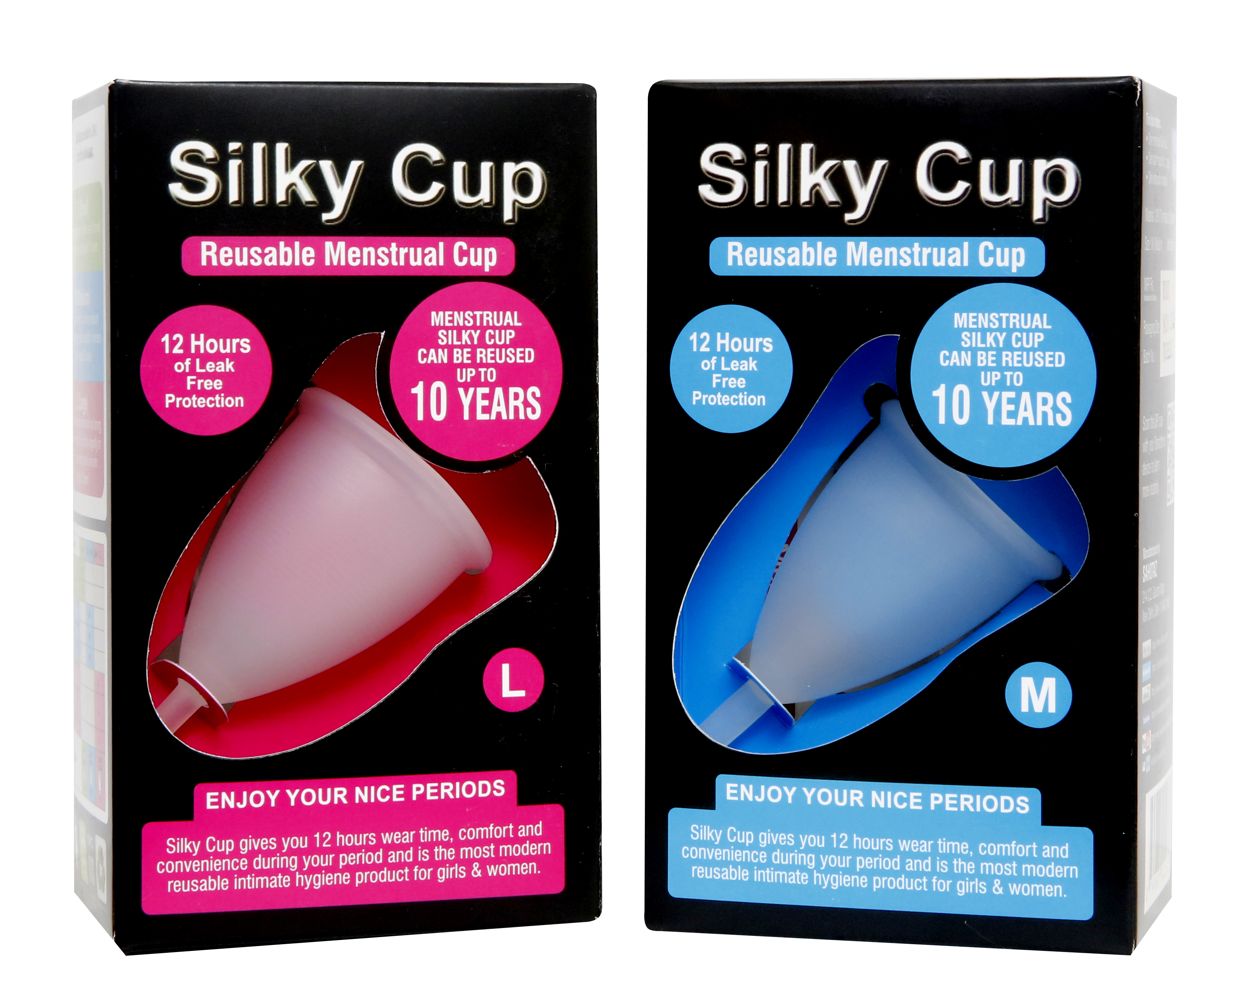 Silky Cup Menstrual Cup India